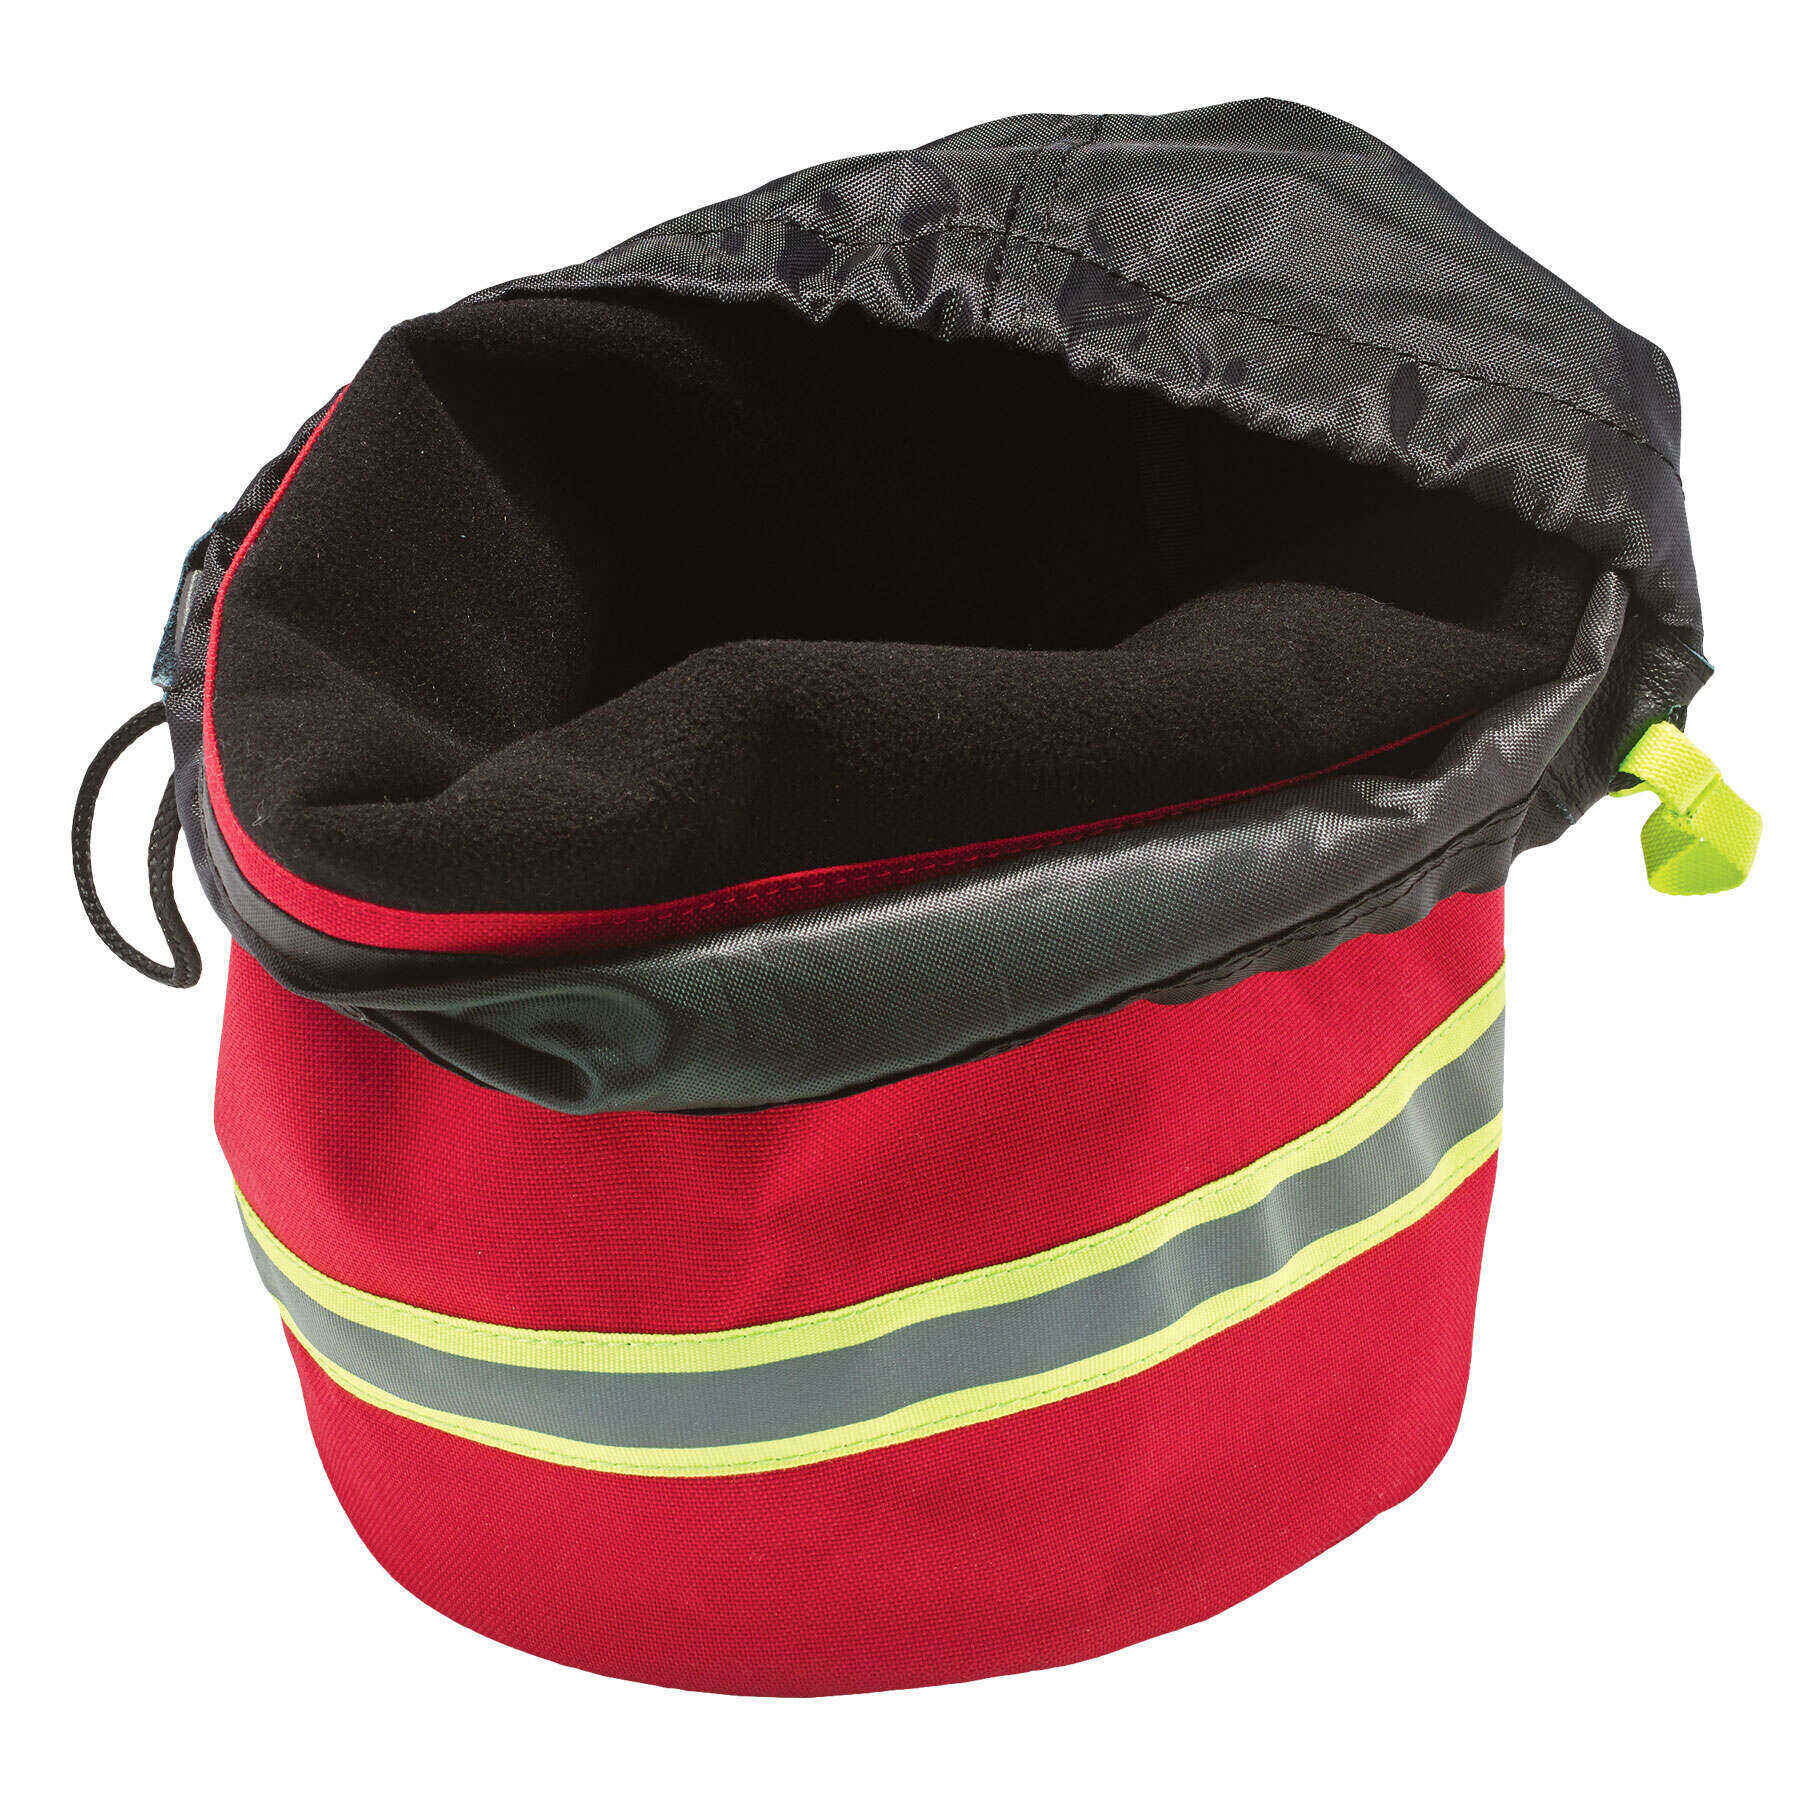 SCBA Mask Bag with Lining